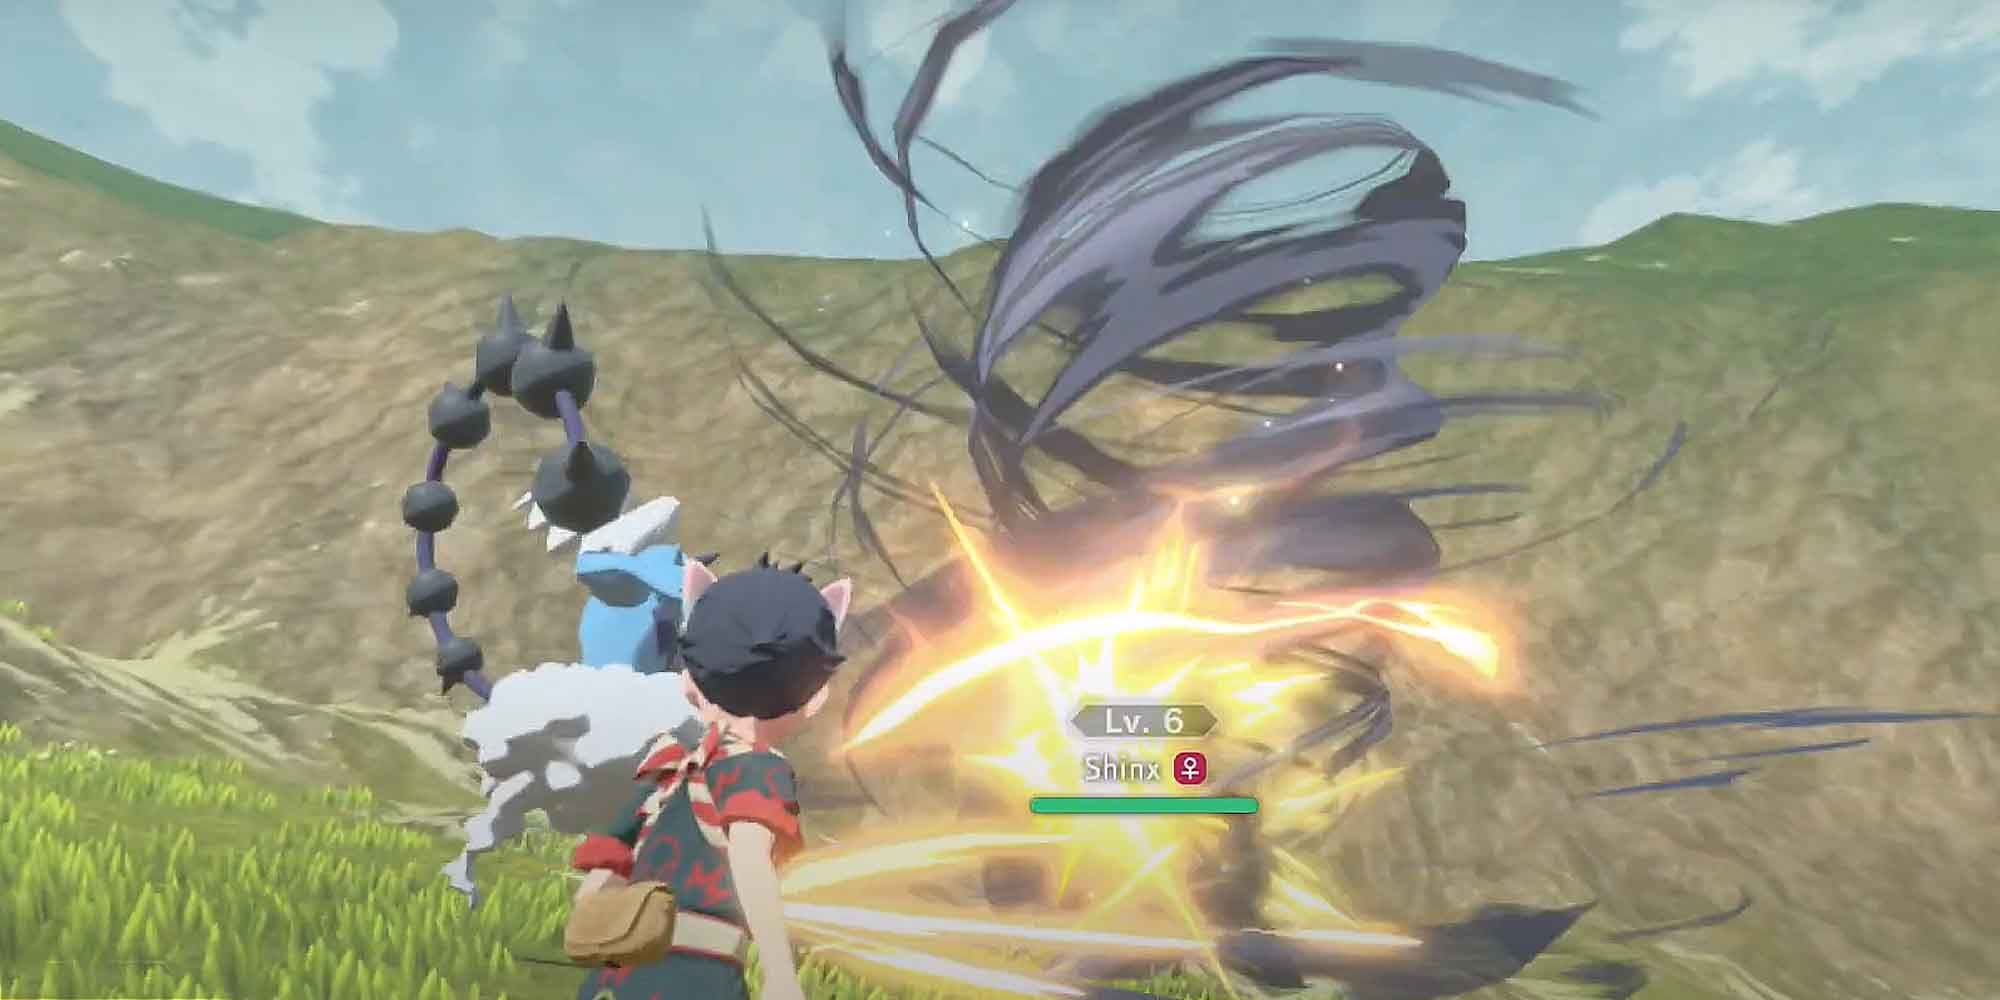 The Wildbolt Storm move in Pokemon: Sword and Shield